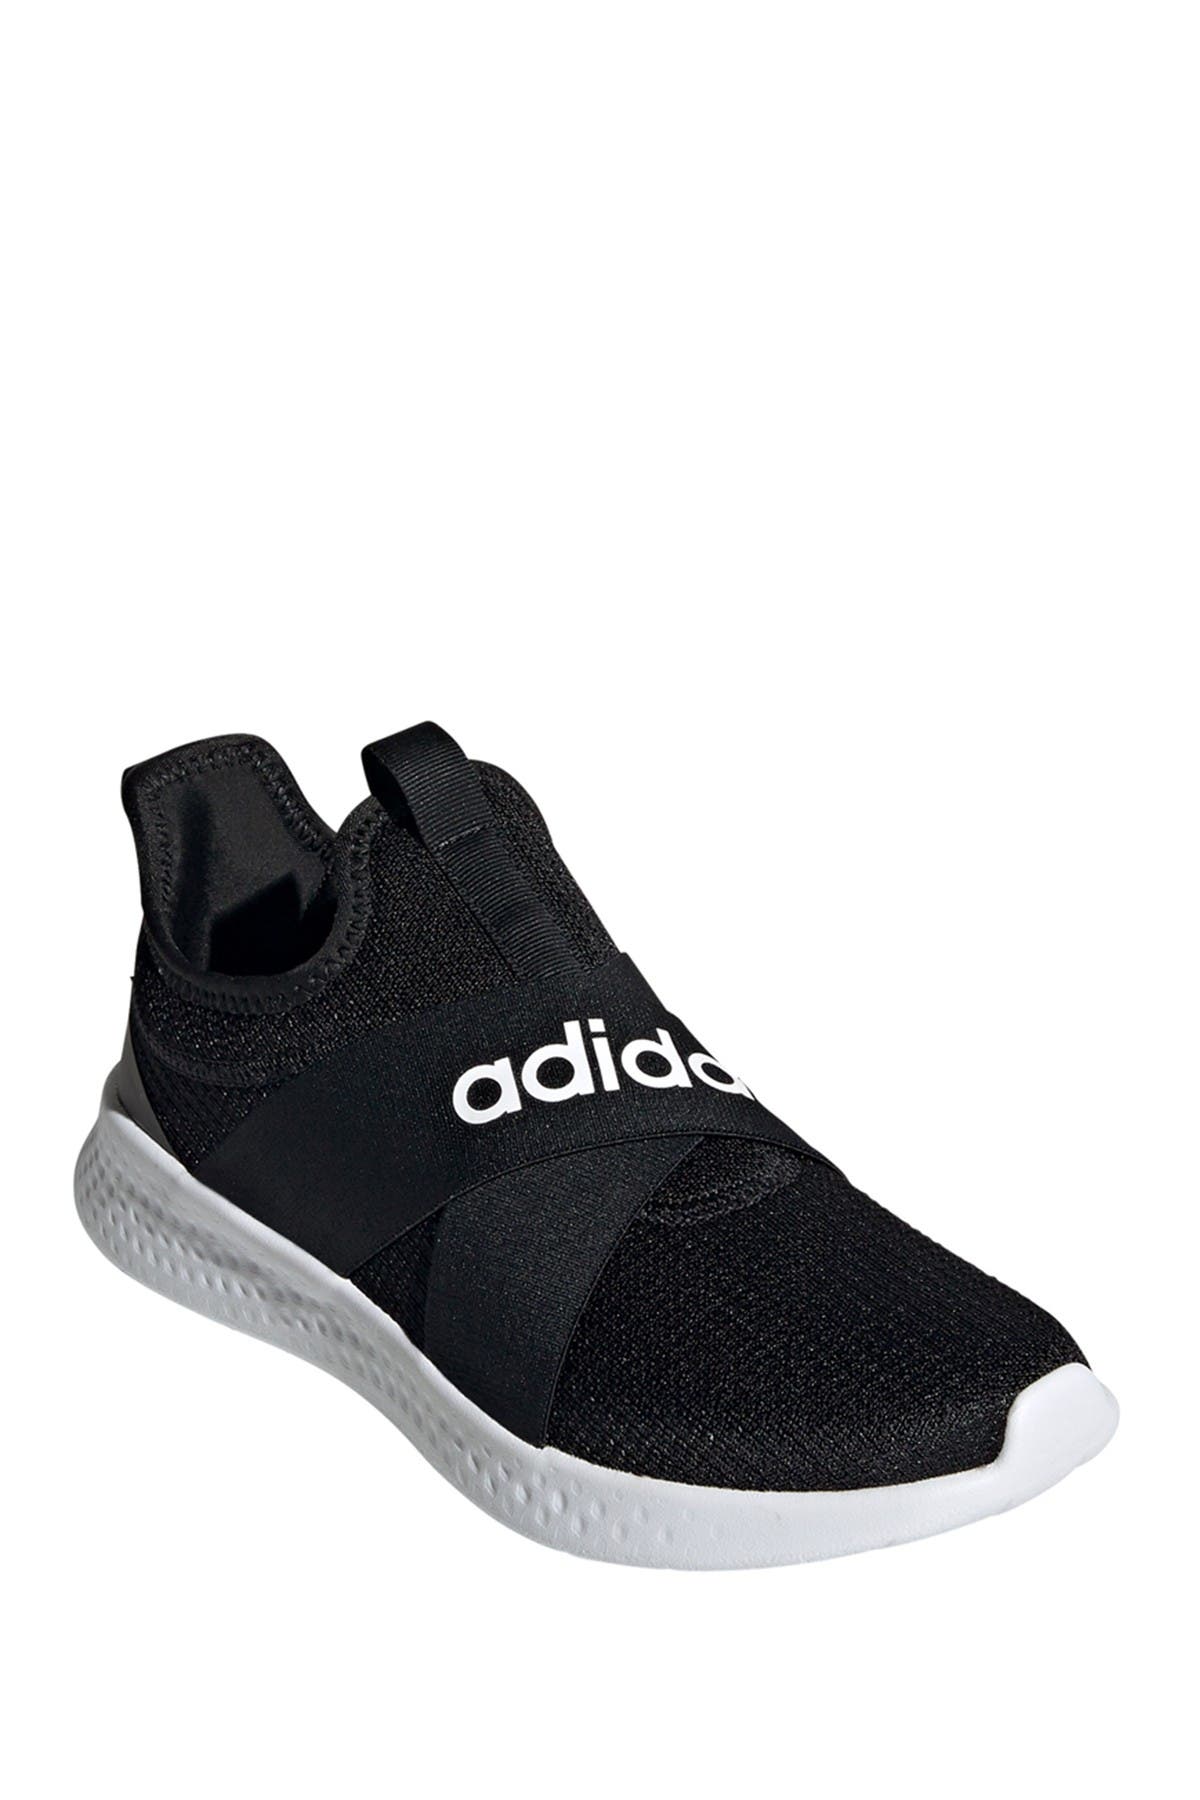 nordstrom rack adidas womens shoes